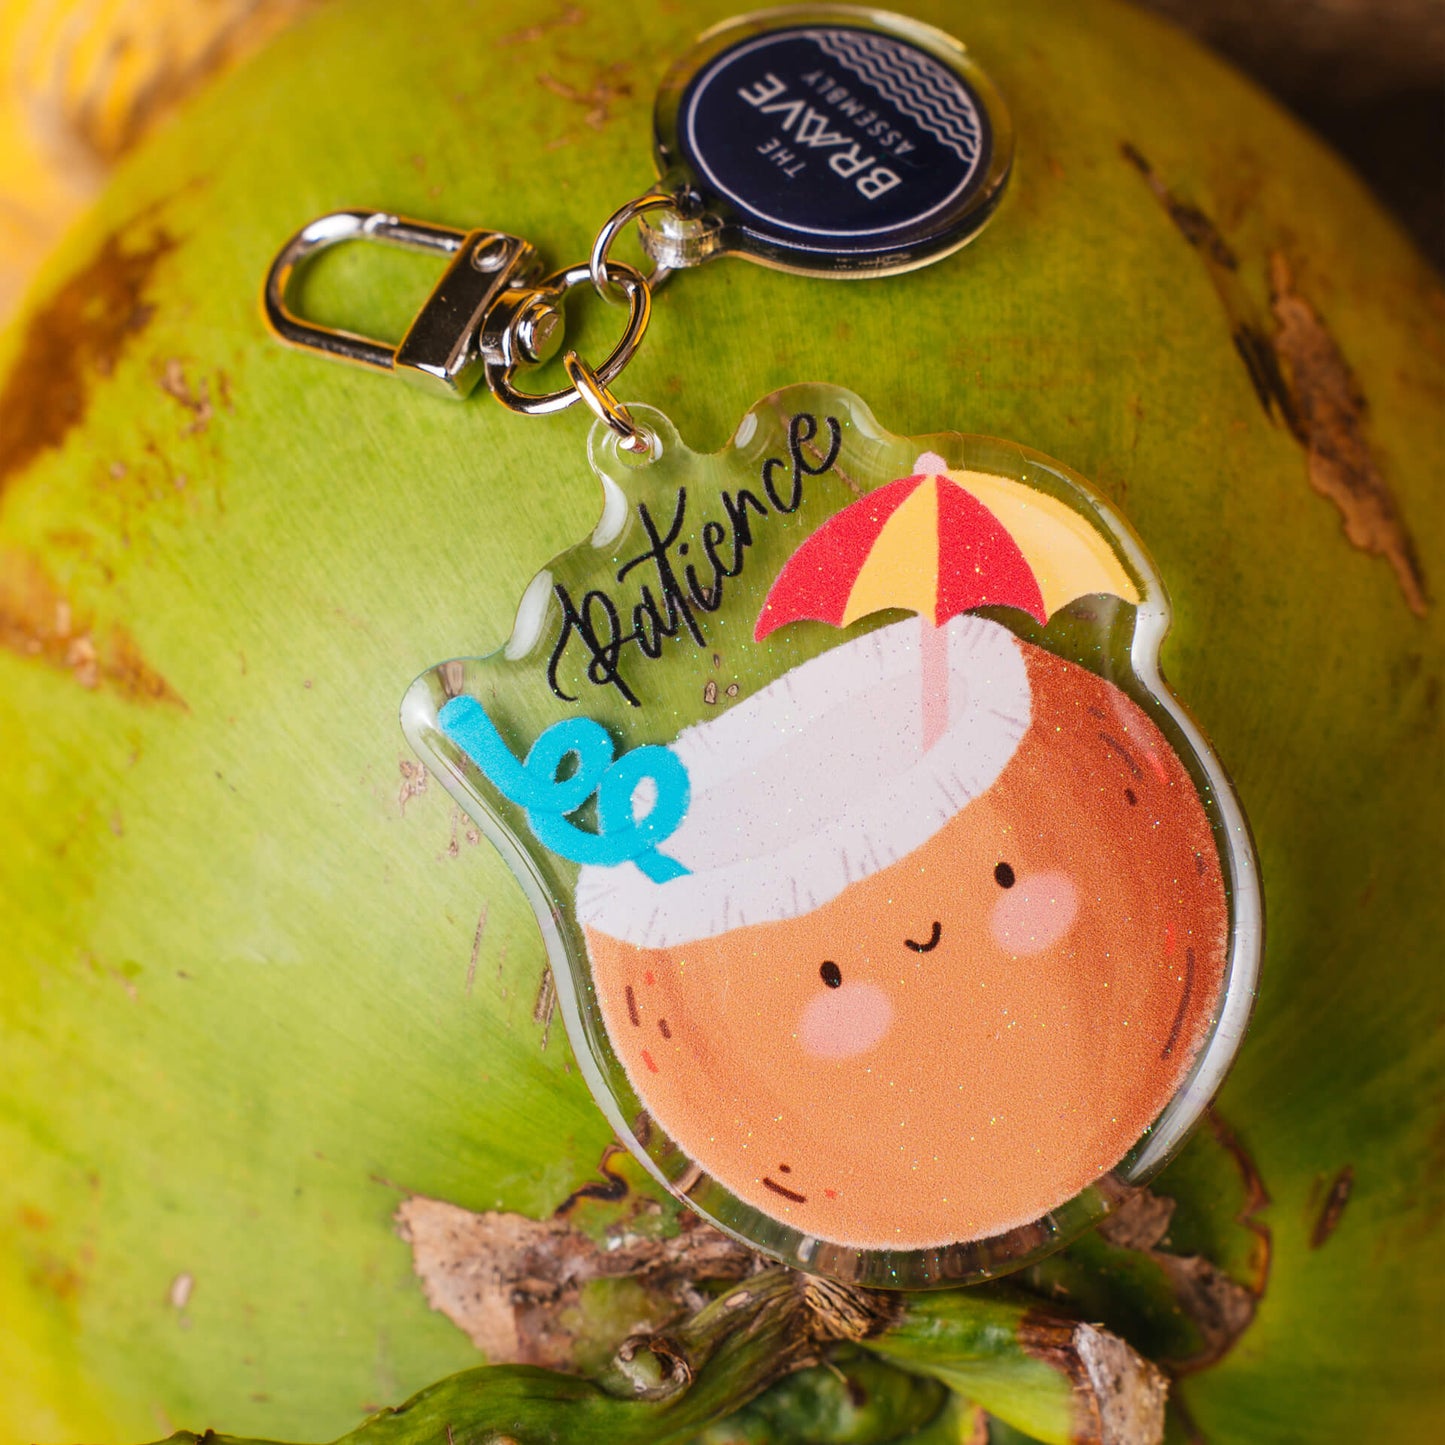 Patience (Coconut) | Keychain is